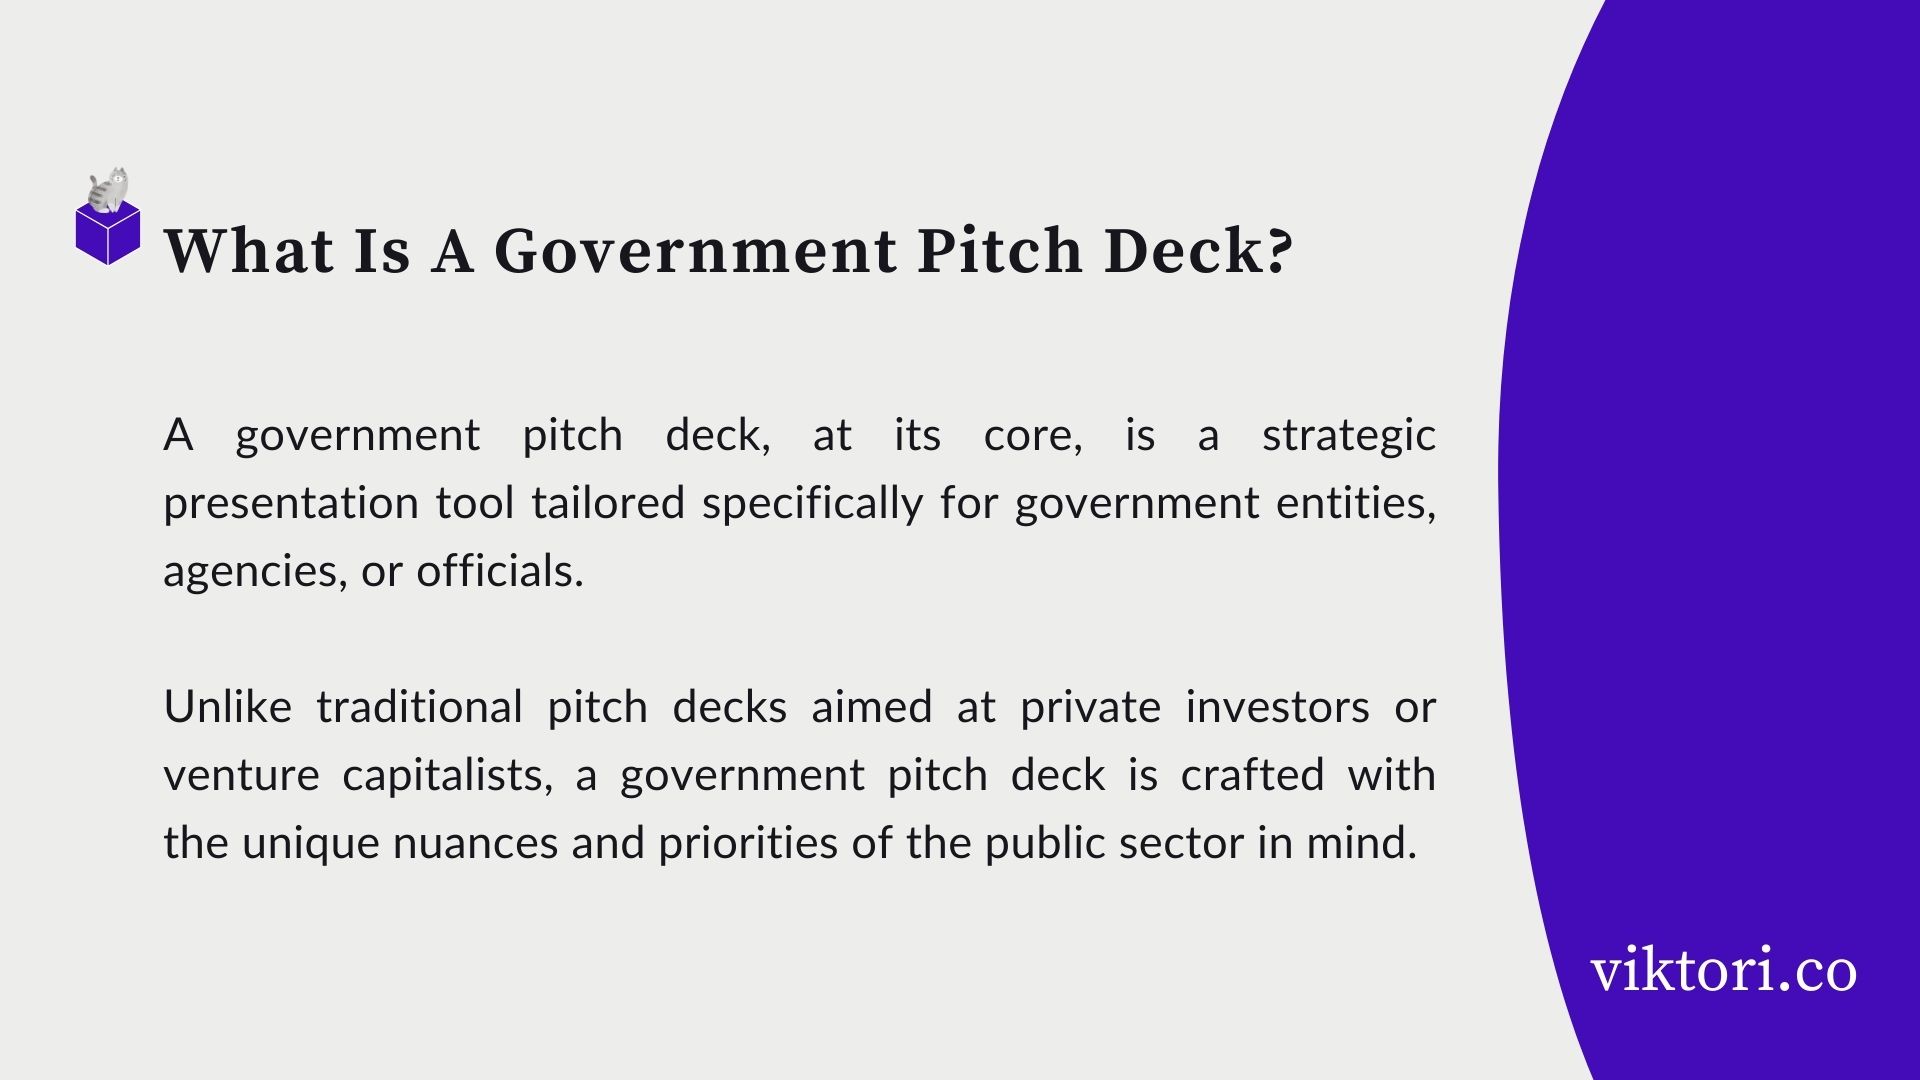 government pitch deck definition